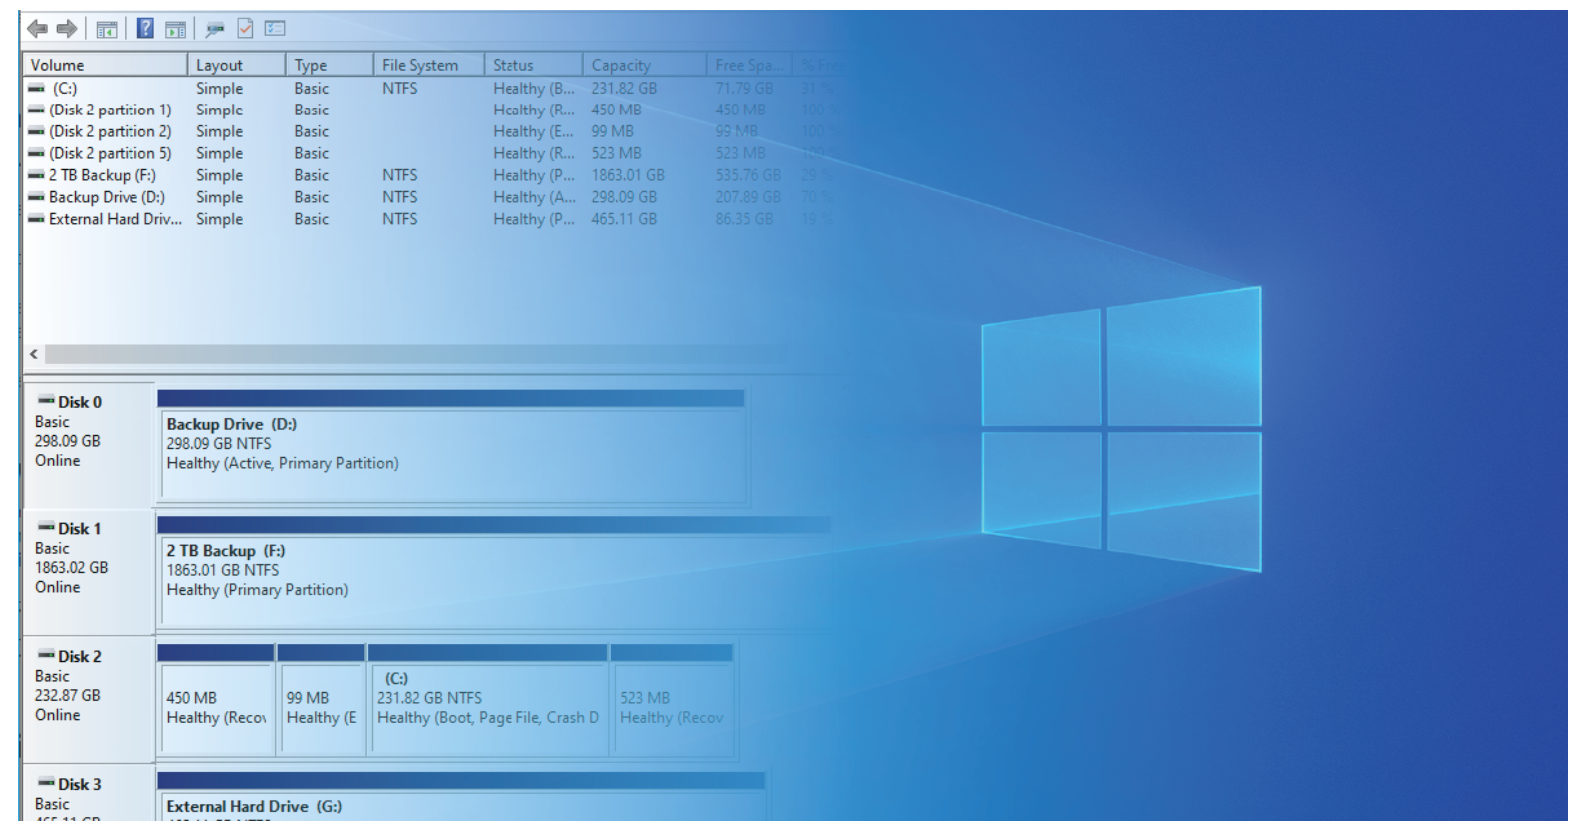 Windows 10 Disk Management Tool - How it Works